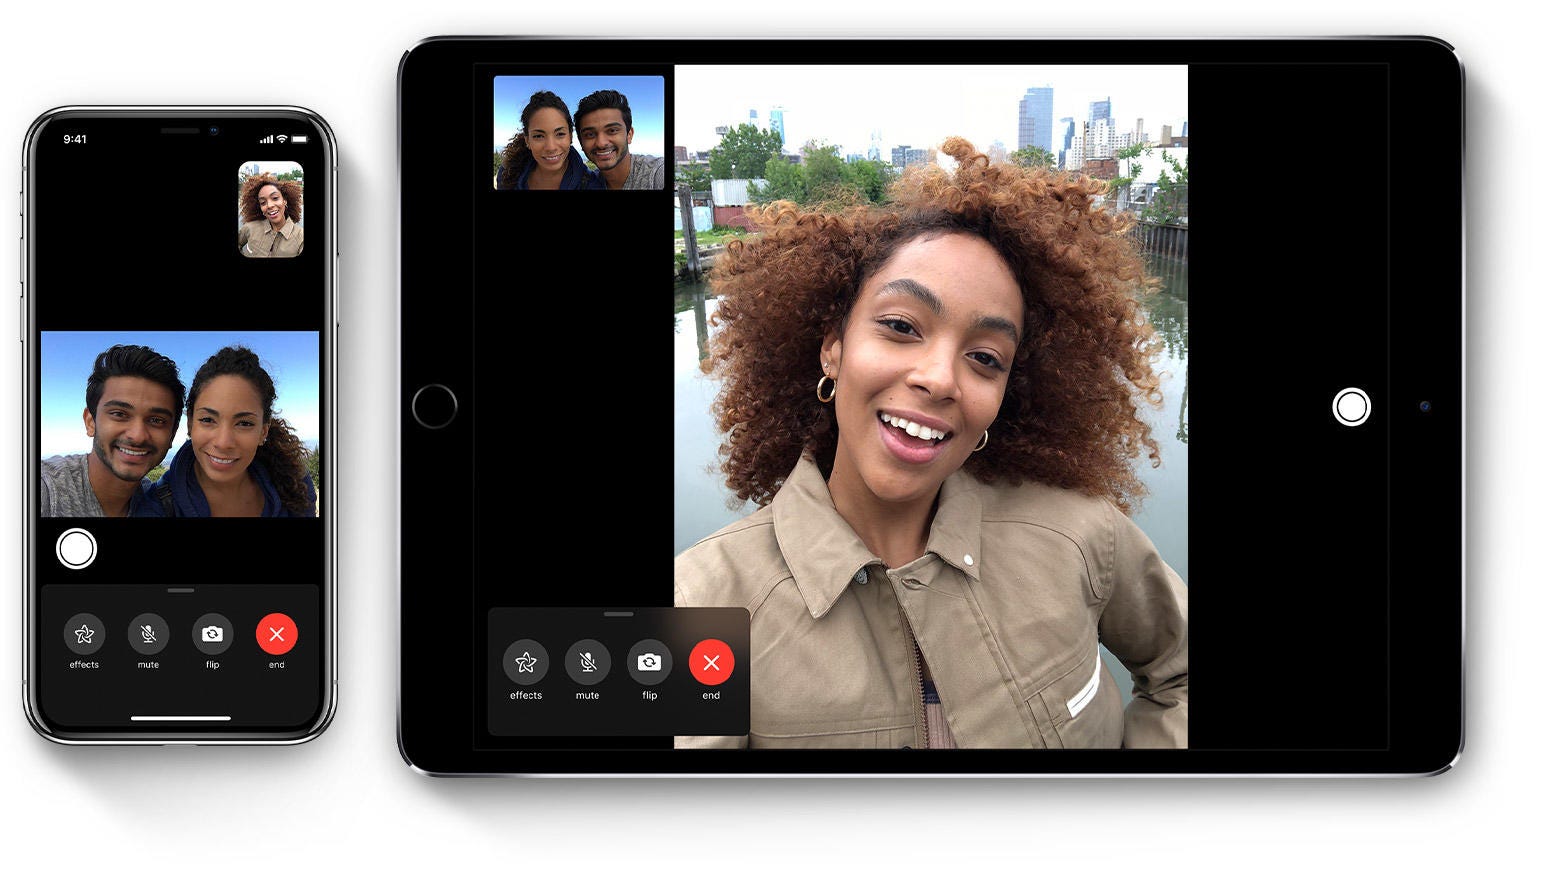 How to disable FaceTime (so no one can eavesdrop on your iPhone or Mac)